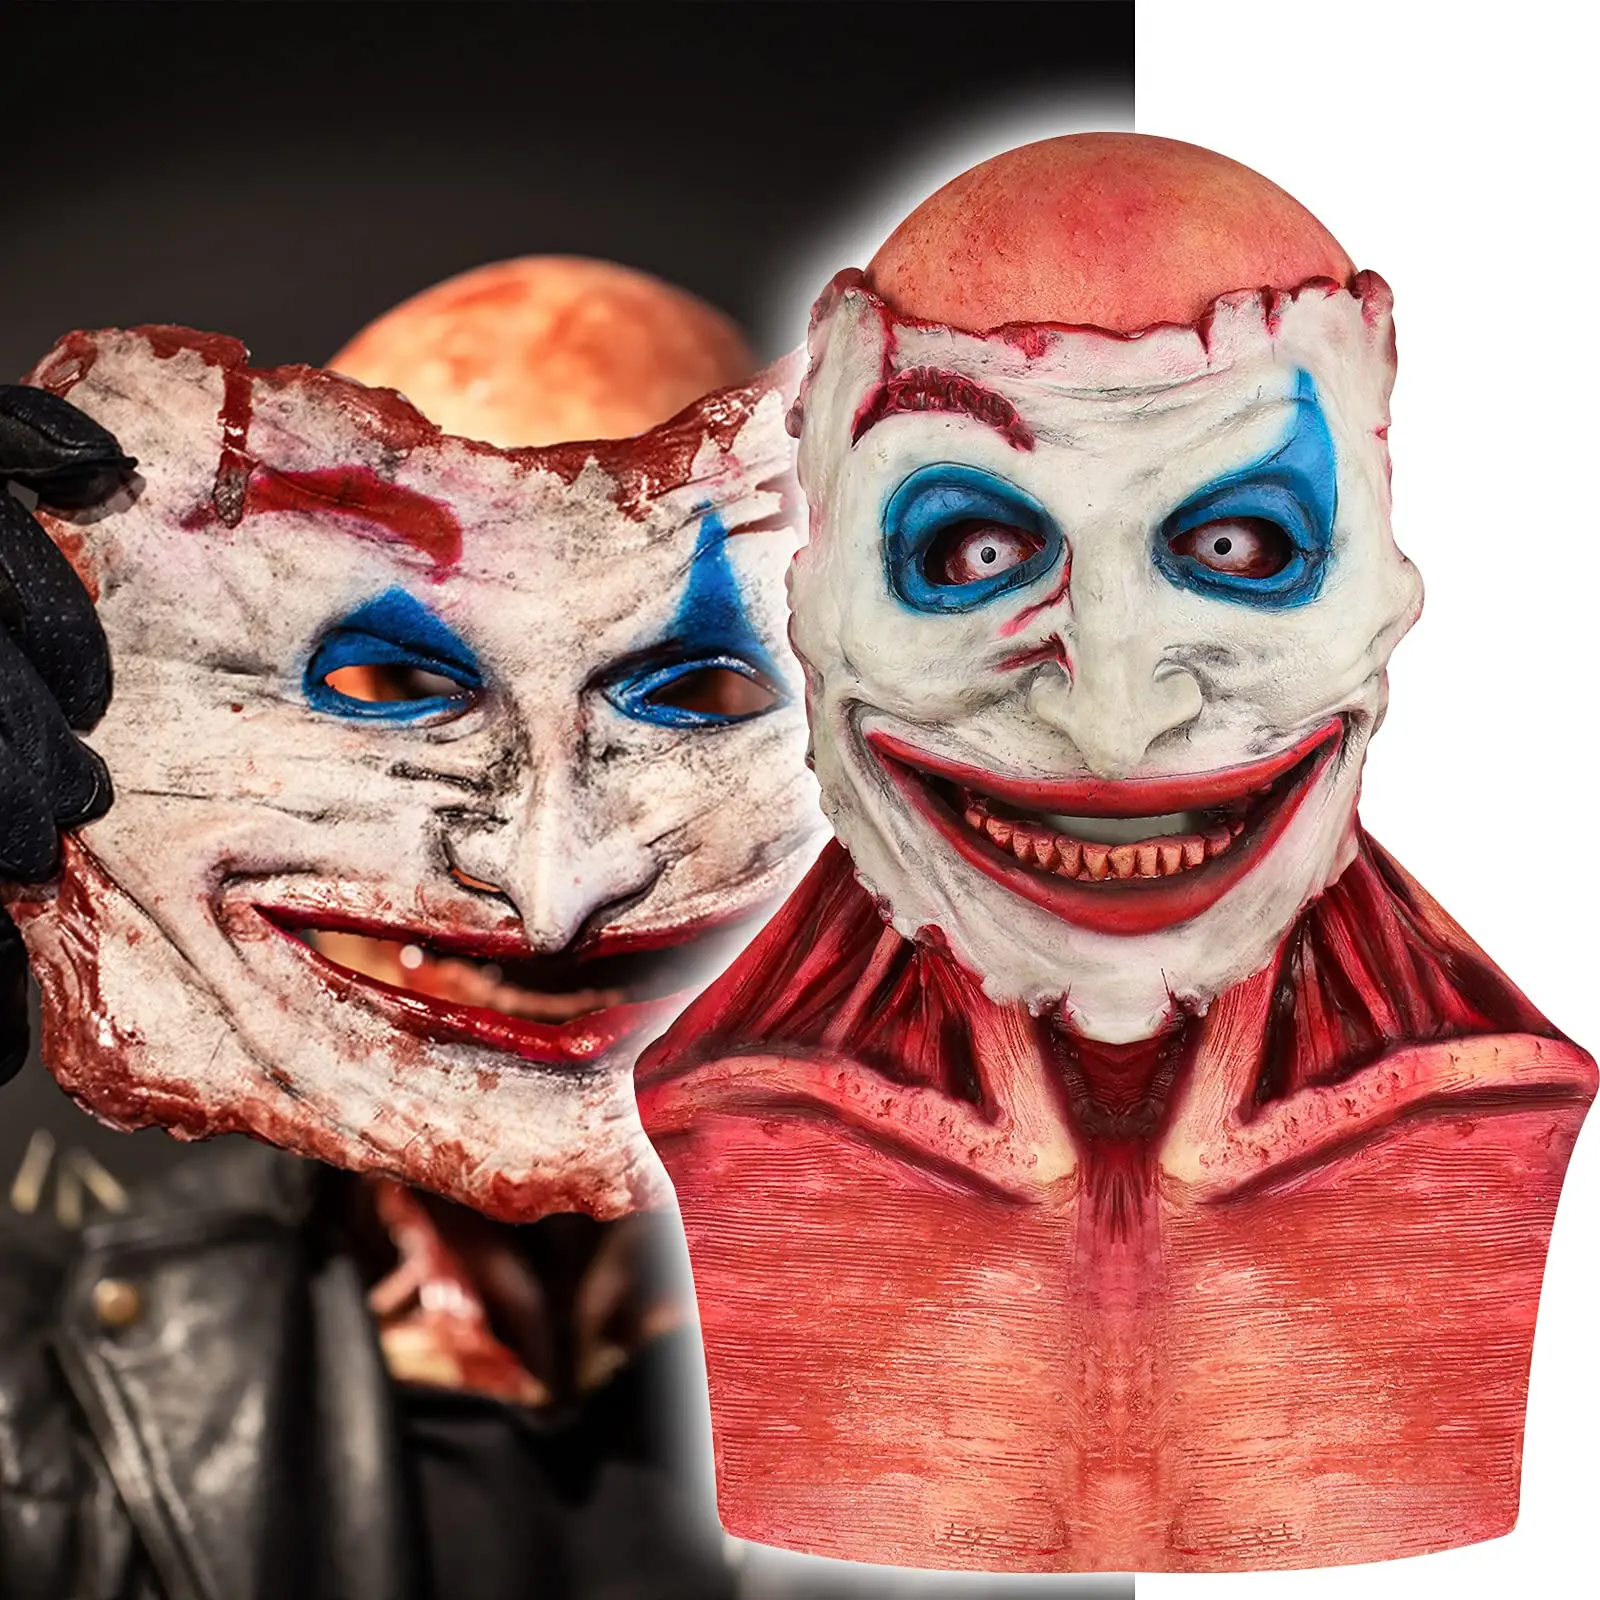 Which Is Me Scary Halloween Mask Tear-Off Type Skeleton Joker or Ghost Rider Double Latex Mask Creepy Cosplay Props